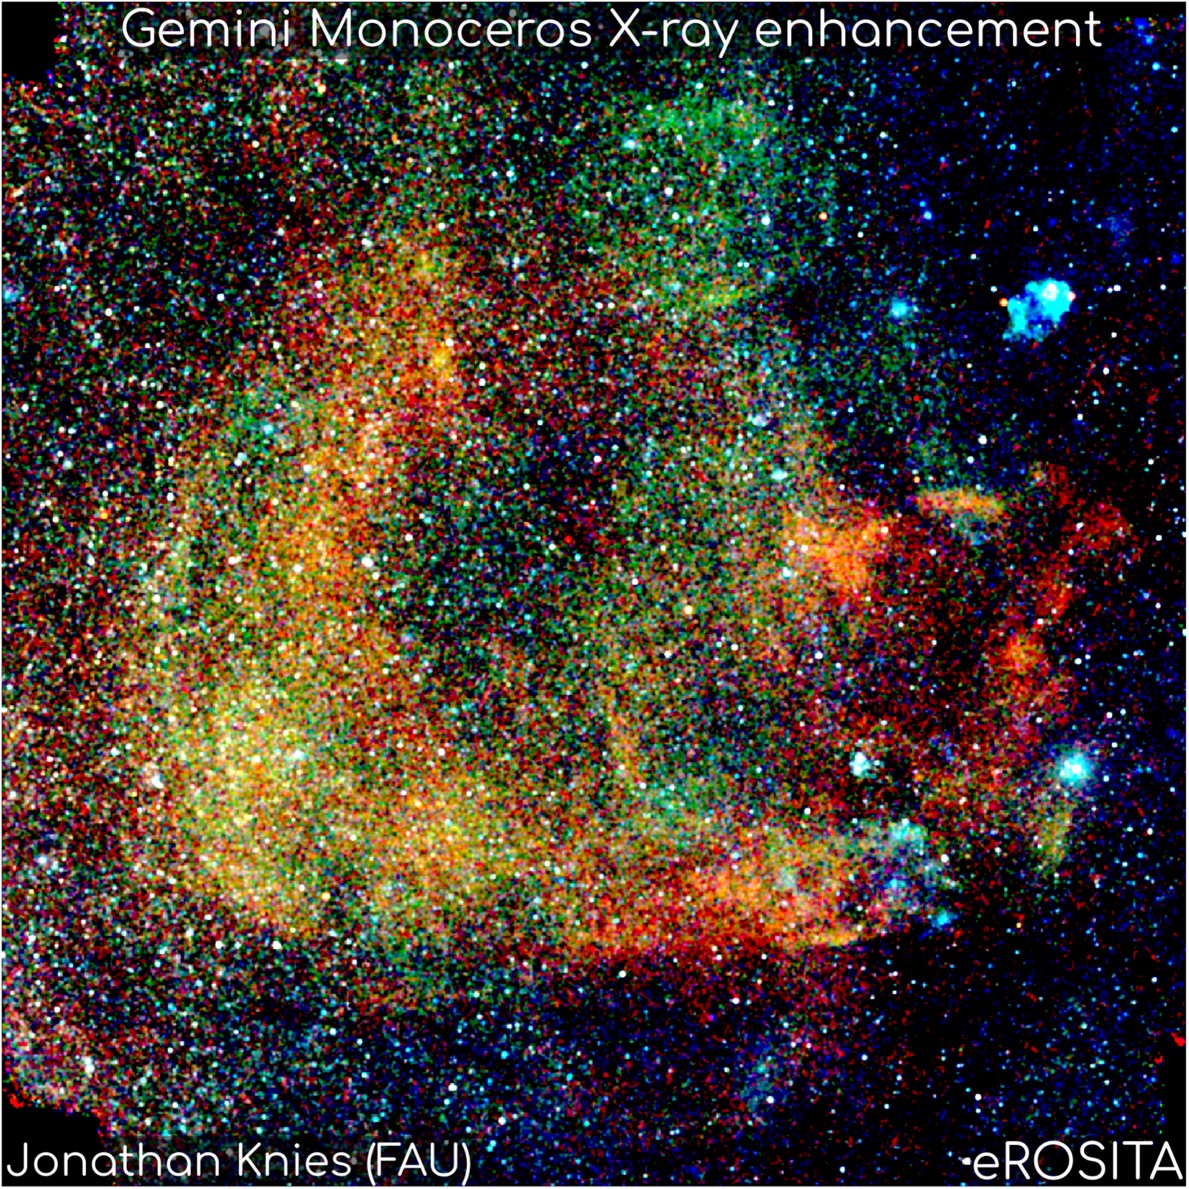 Extended X-ray emission in the sky caused by supernova explosions in our vicinity.